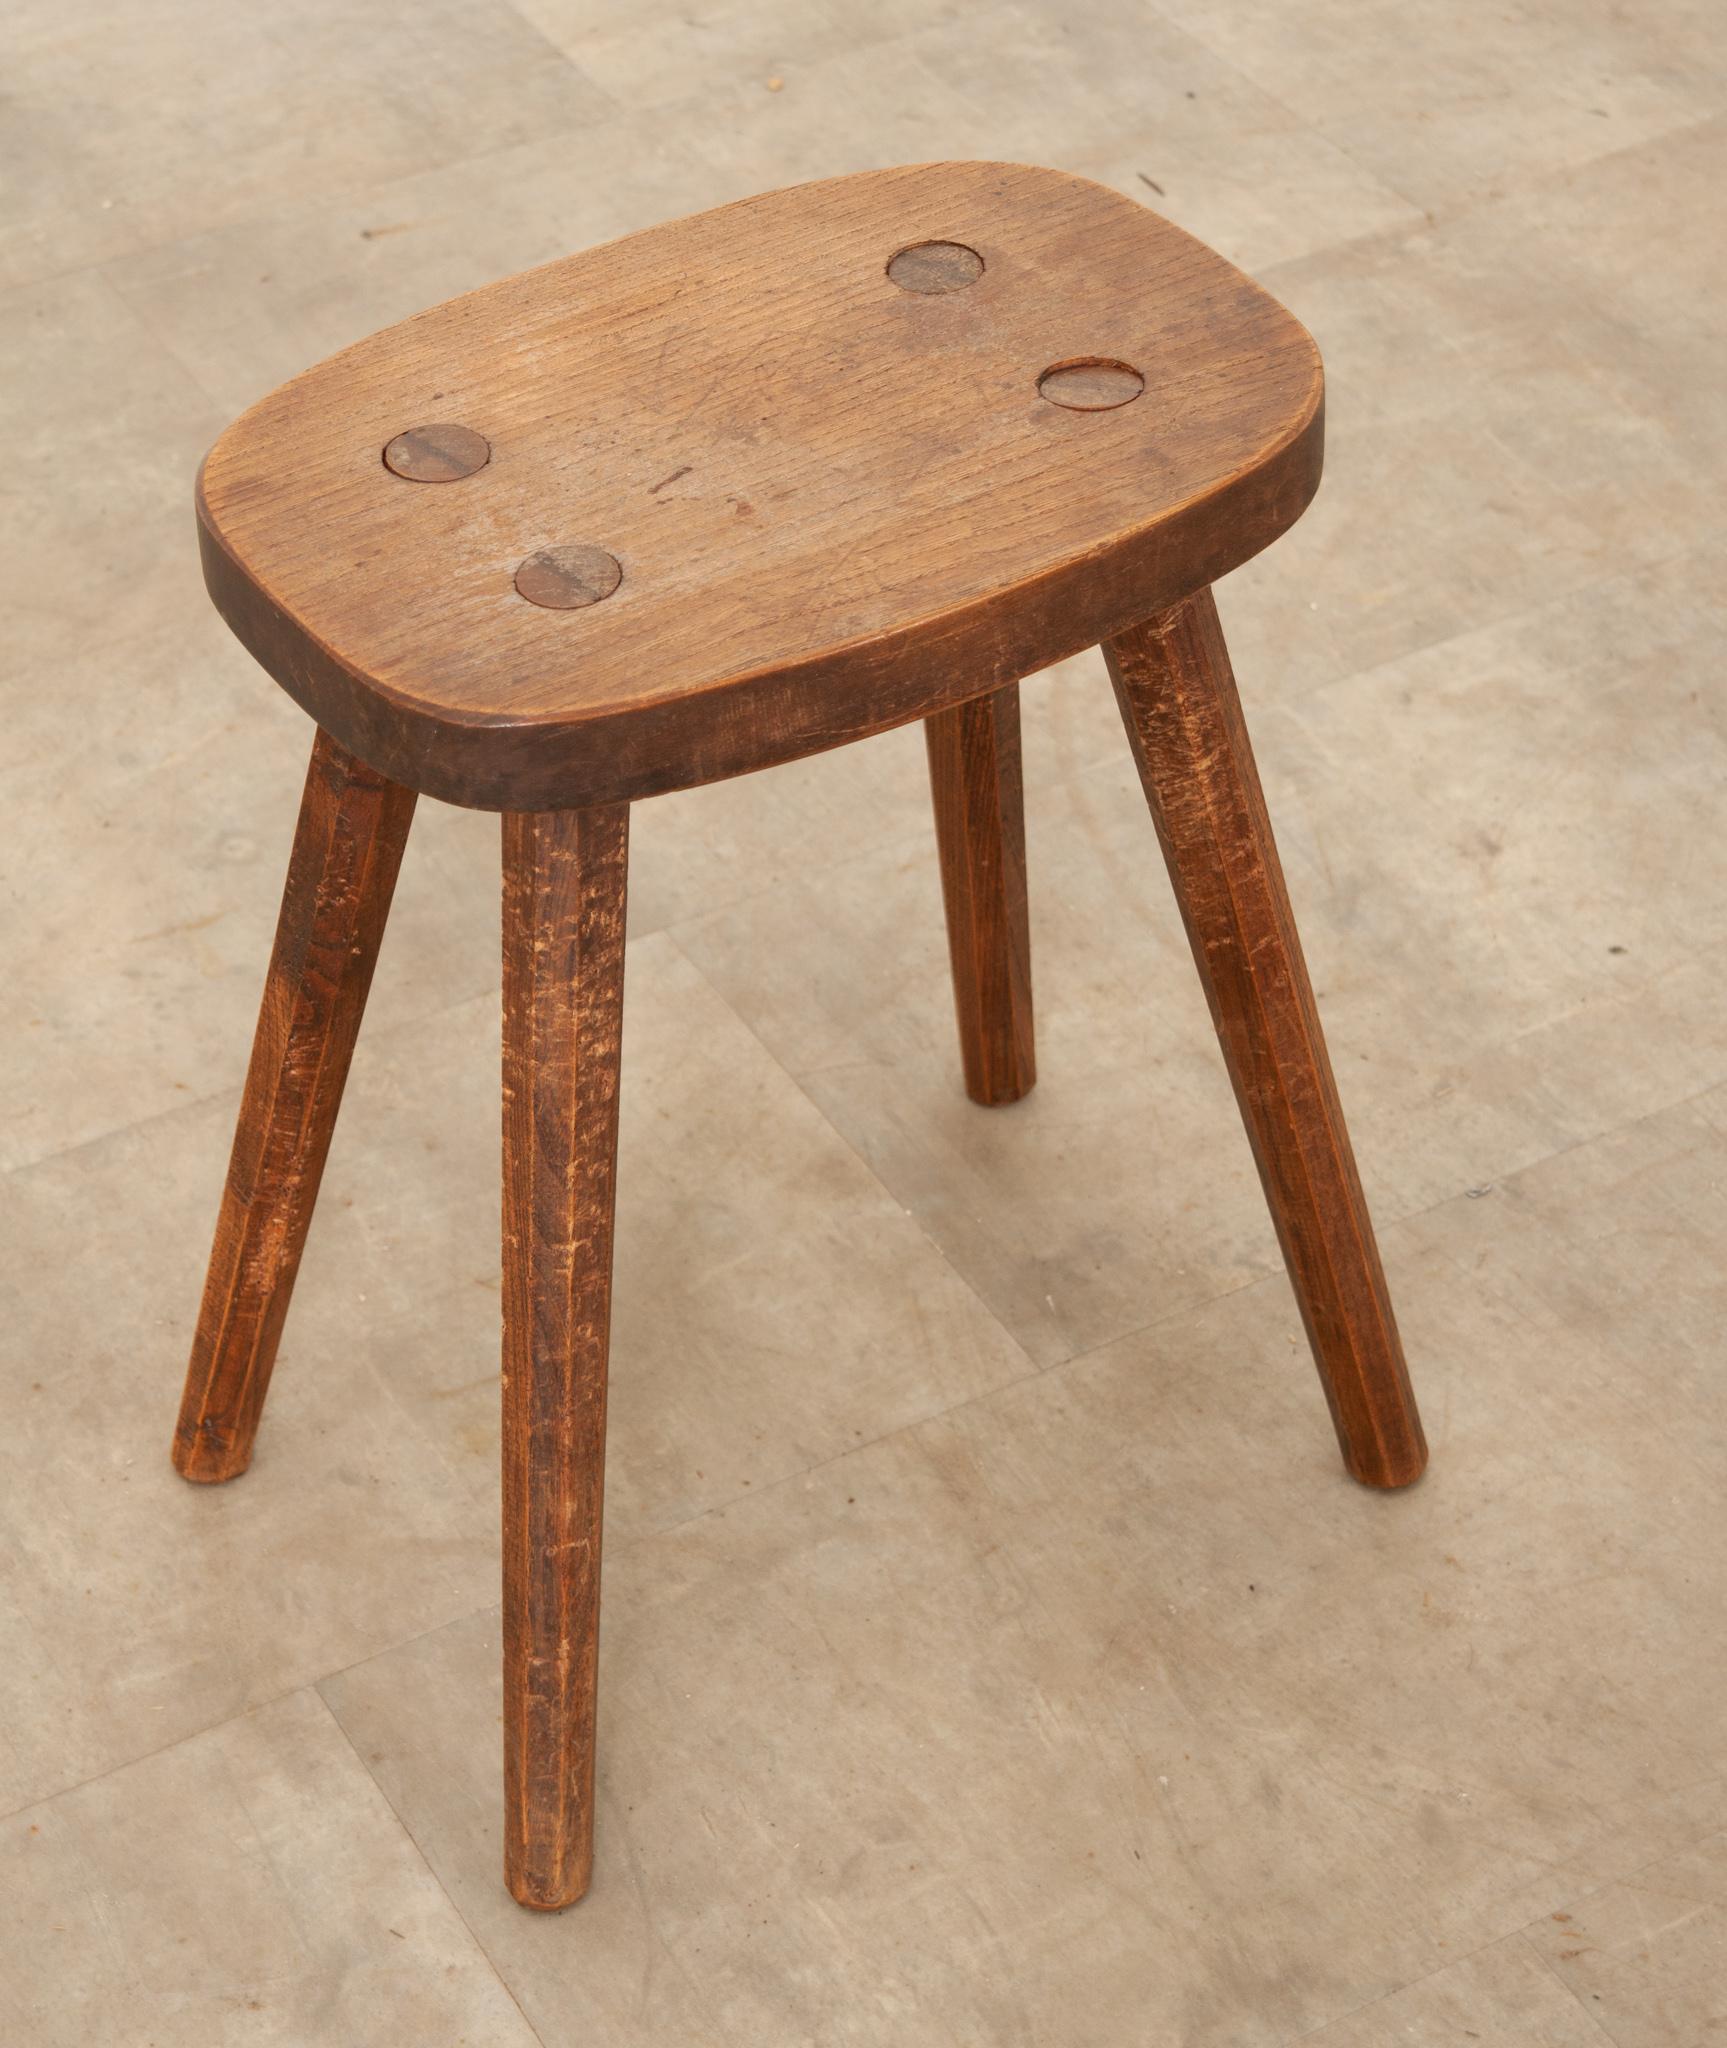 Contact from countless hours spent on the farm have patinated the top of this wonderful French milking stool. Its rectangular top is supported by four splayed legs in a simple construction. Dating to the 1800s, this wonderful antique seat could